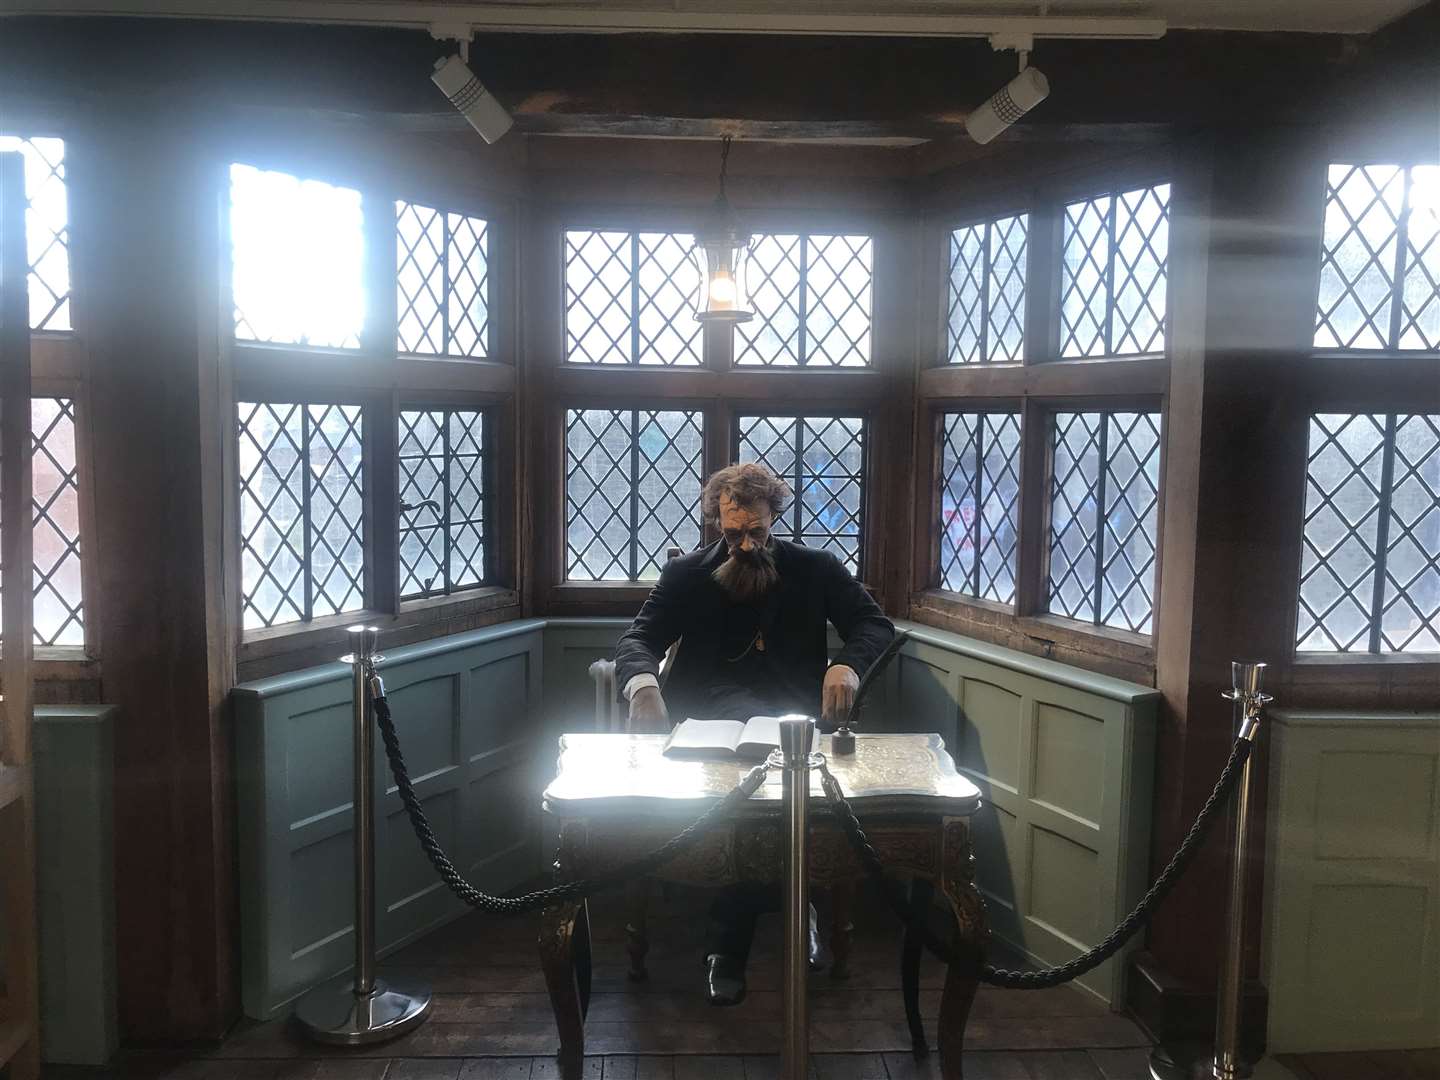 Dickens at his desk in the Dickens Room at Eastgate House